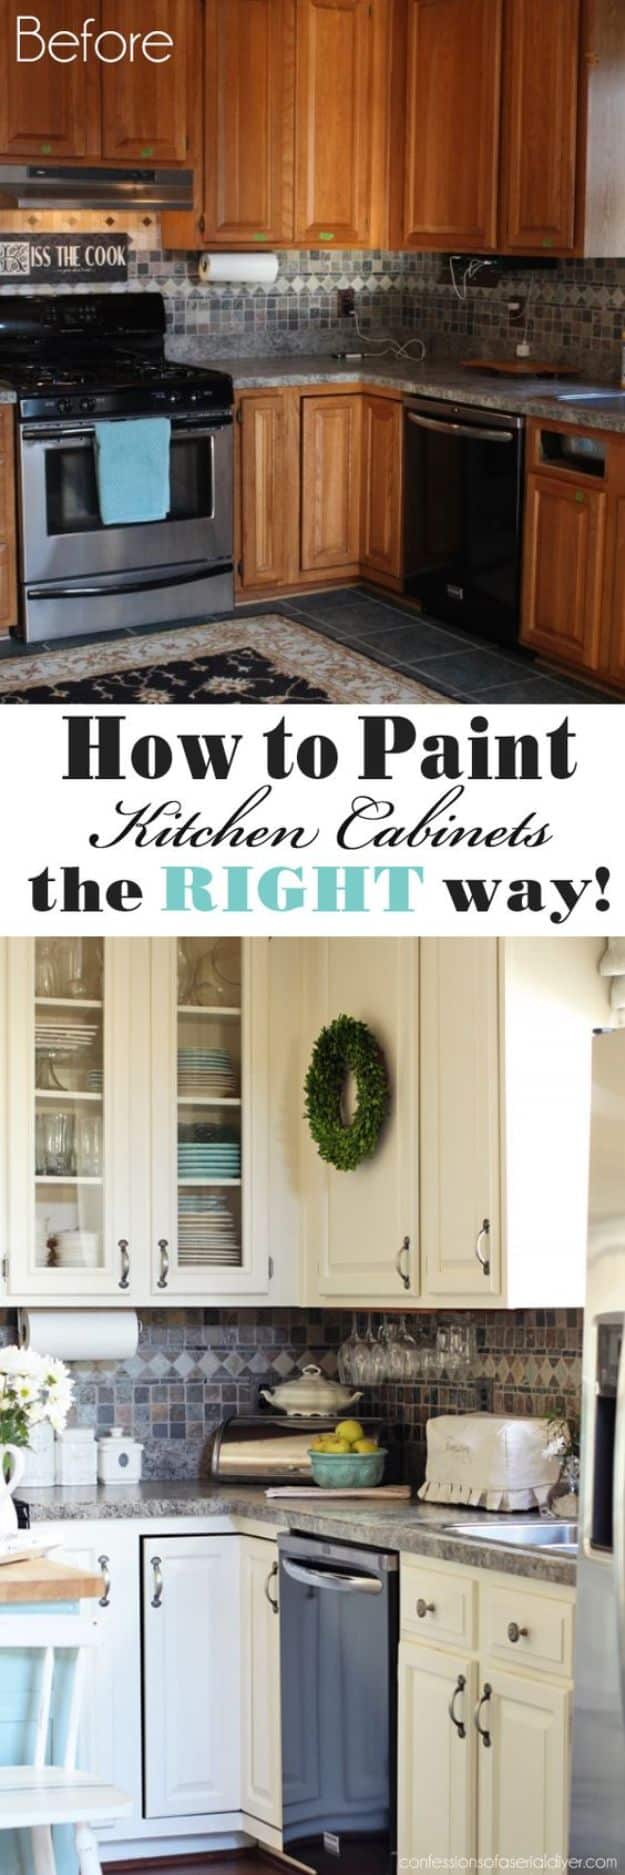 DIY Kitchen Cabinet Ideas - Paint Your Kitchen Cabinets - Makeover and Before and After - How To Build, Plan and Renovate Your Kitchen Cabinets - Painted, Cheap Refact, Free Plans, Rustic Decor, Farmhouse and Vintage Looks, Modern Design and Inexpensive Budget Friendly Projects 